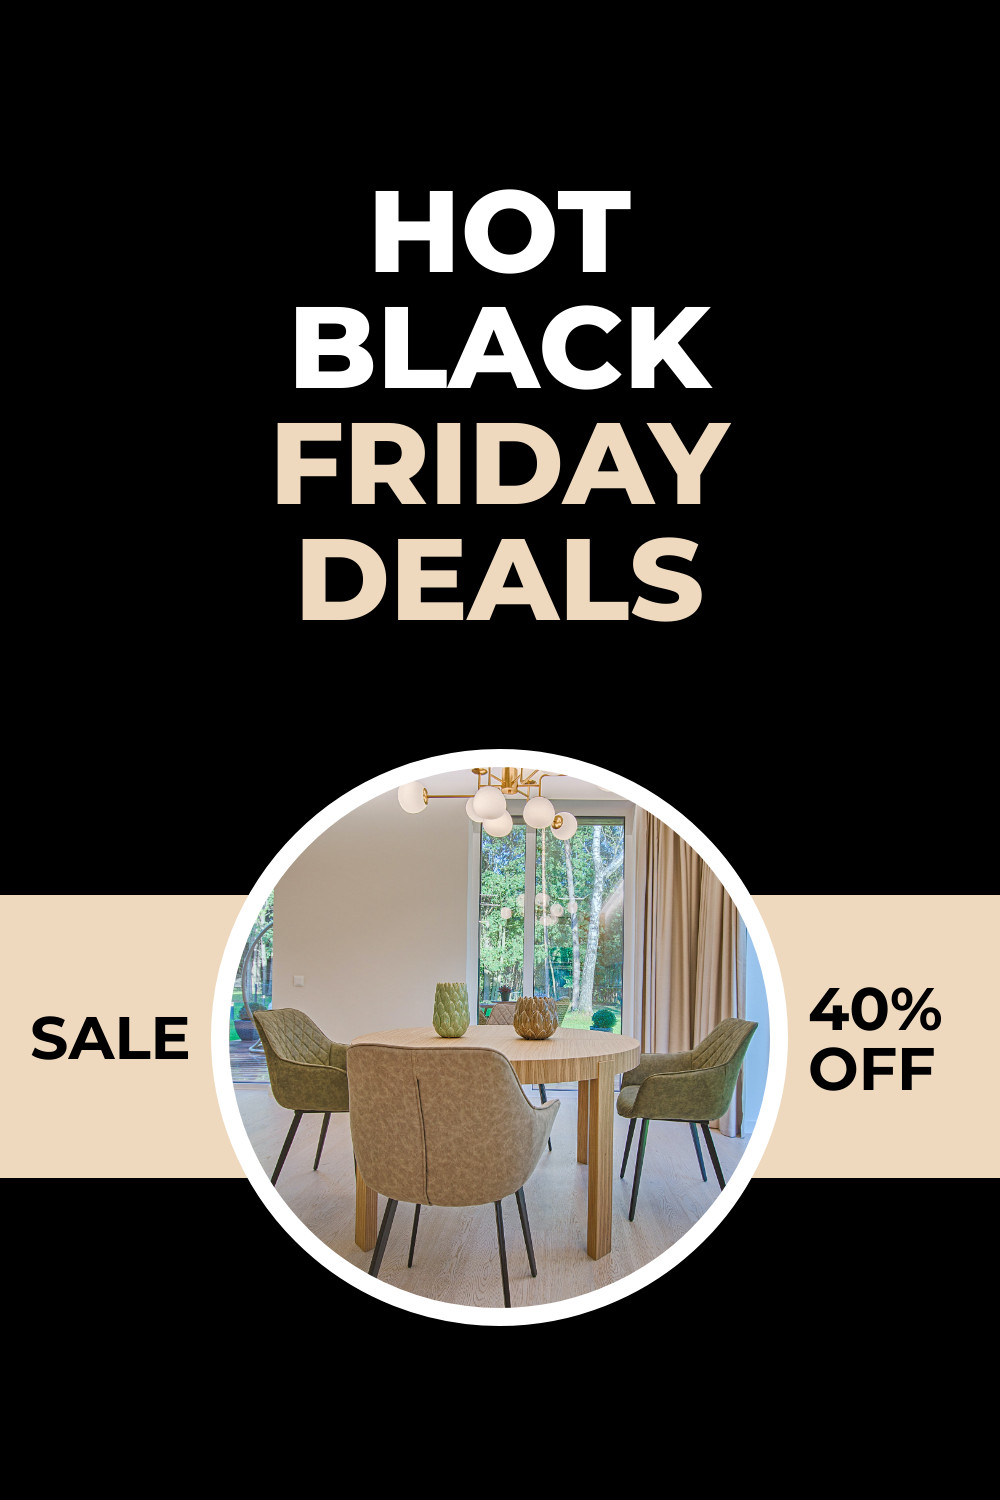 Black Friday Deal Ad Template Facebook Cover 820x360